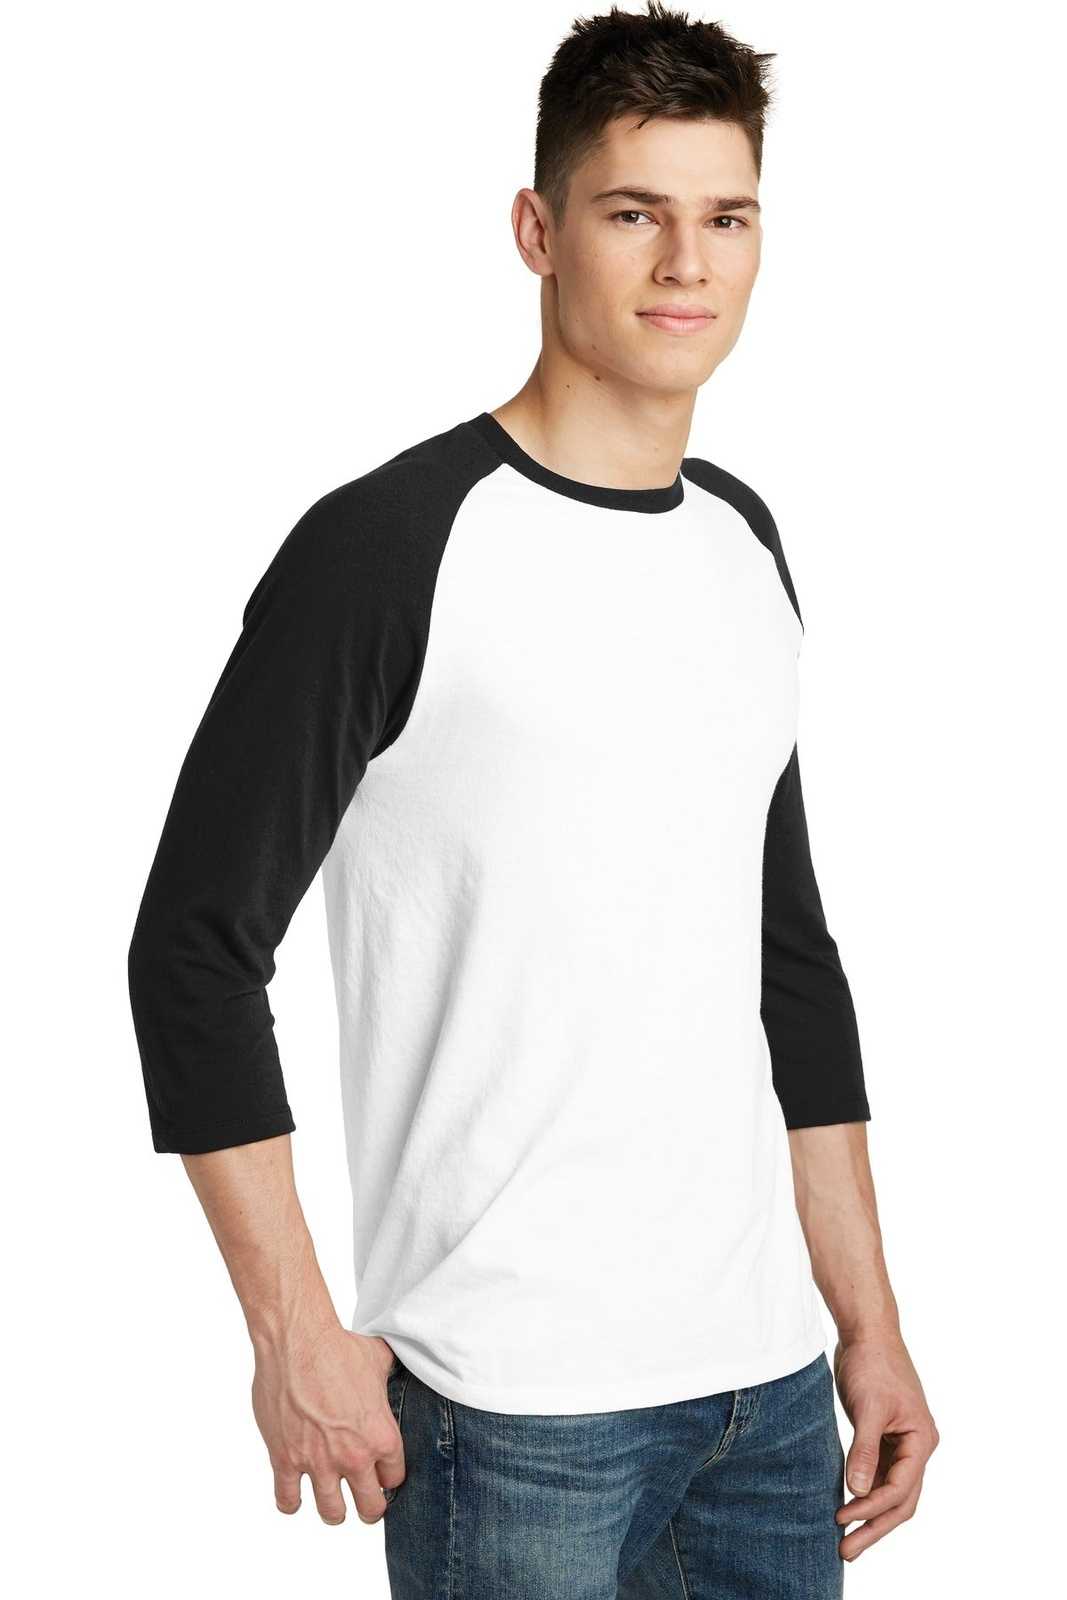 District DT6210 Very Important Tee 3/4-Sleeve Raglan - Black White - HIT a Double - 4